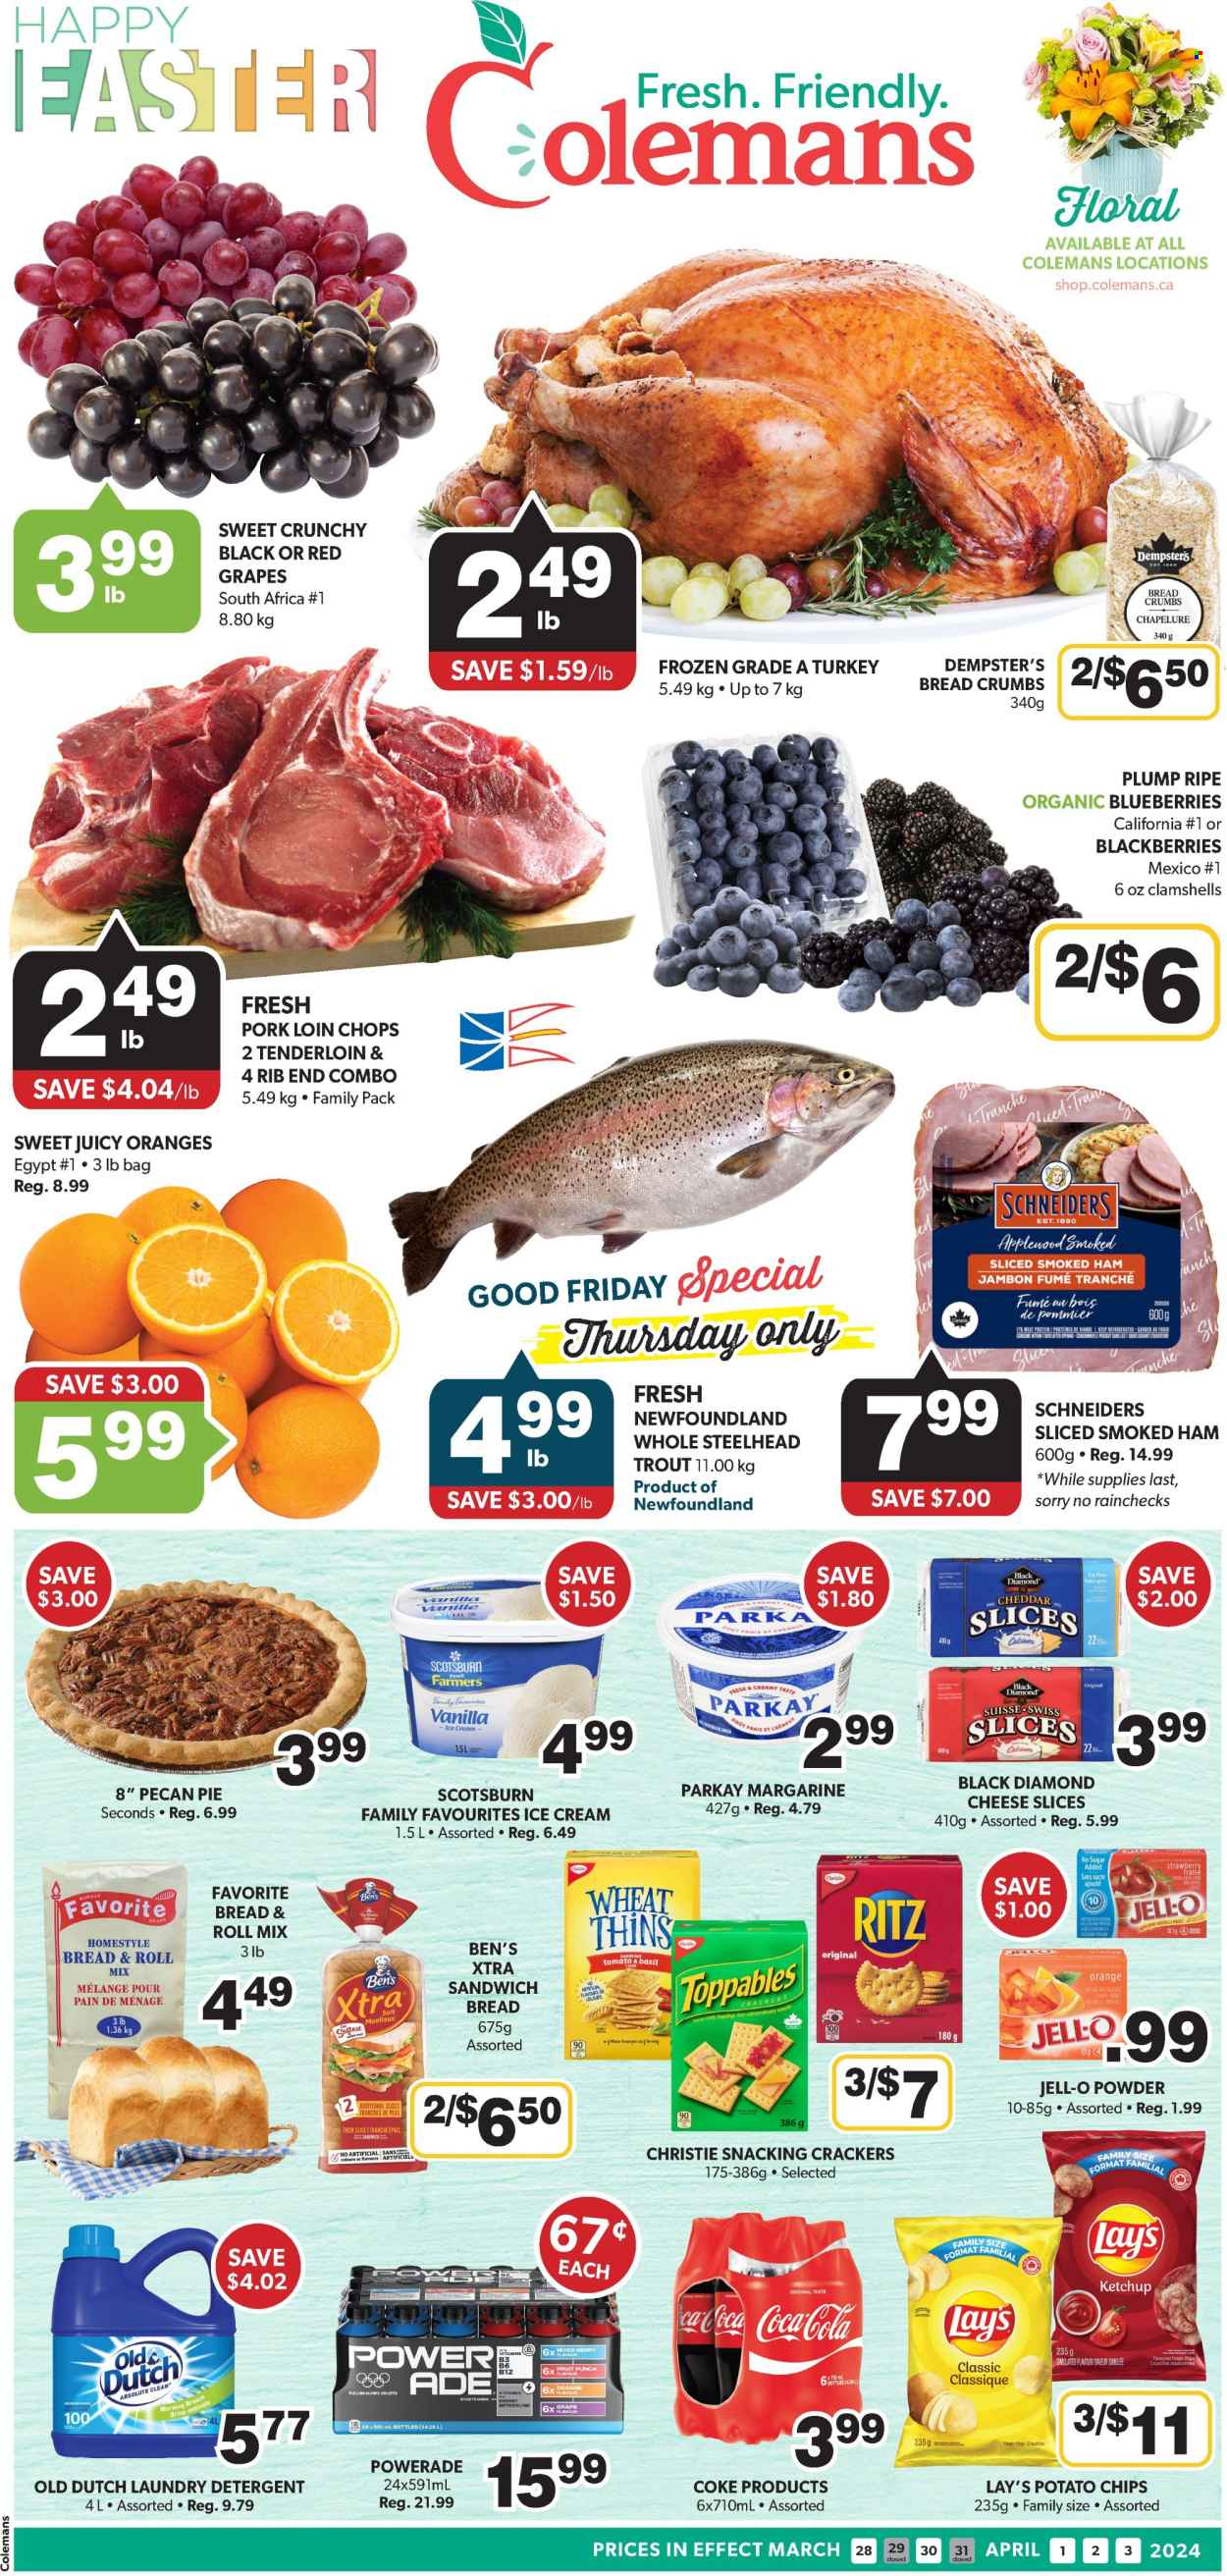 thumbnail - Colemans Flyer - March 28, 2024 - May 03, 2024 - Sales products - pie, breadcrumbs, blackberries, blueberries, oranges, trout, snack, ham, smoked ham, sliced cheese, cheese, margarine, ice cream, crackers, RITZ, potato chips, Lay’s, Thins, salty snack, topping, Jell-O, herbs, ketchup, Coca-Cola, Powerade, energy drink, soft drink, fruit punch, Coke, electrolyte drink, carbonated soft drink, pork chops, pork loin, pork meat, detergent, laundry detergent, XTRA, Absolute, calcium, dietary supplement, vitamins, parka. Page 1.